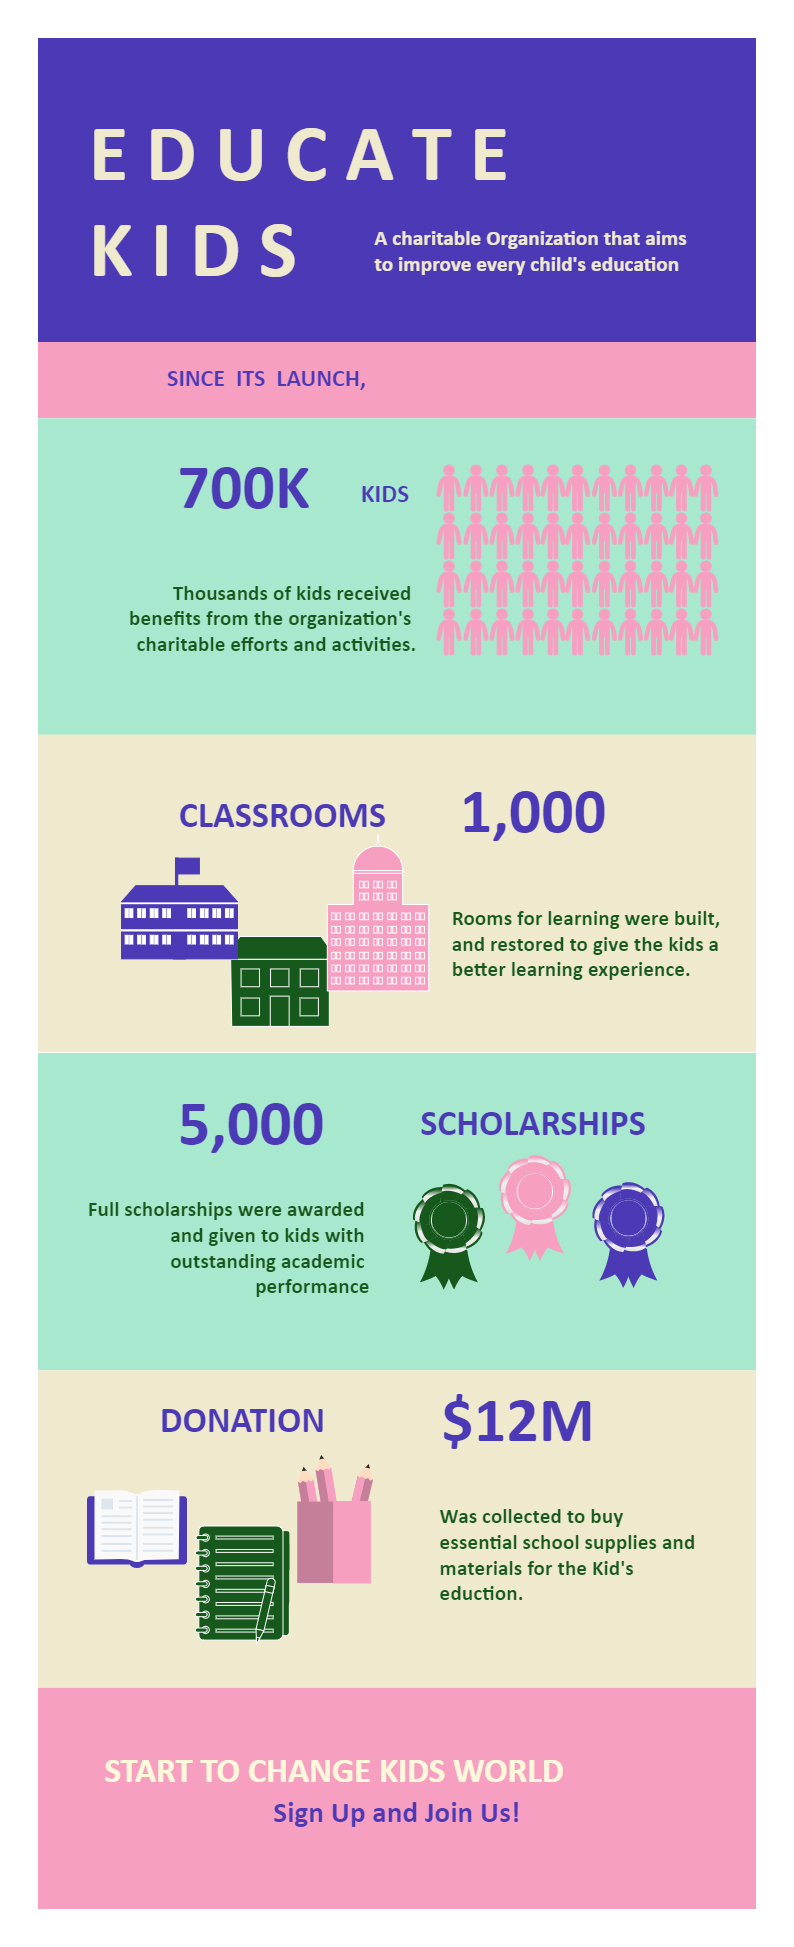 Education Infographic for Kids